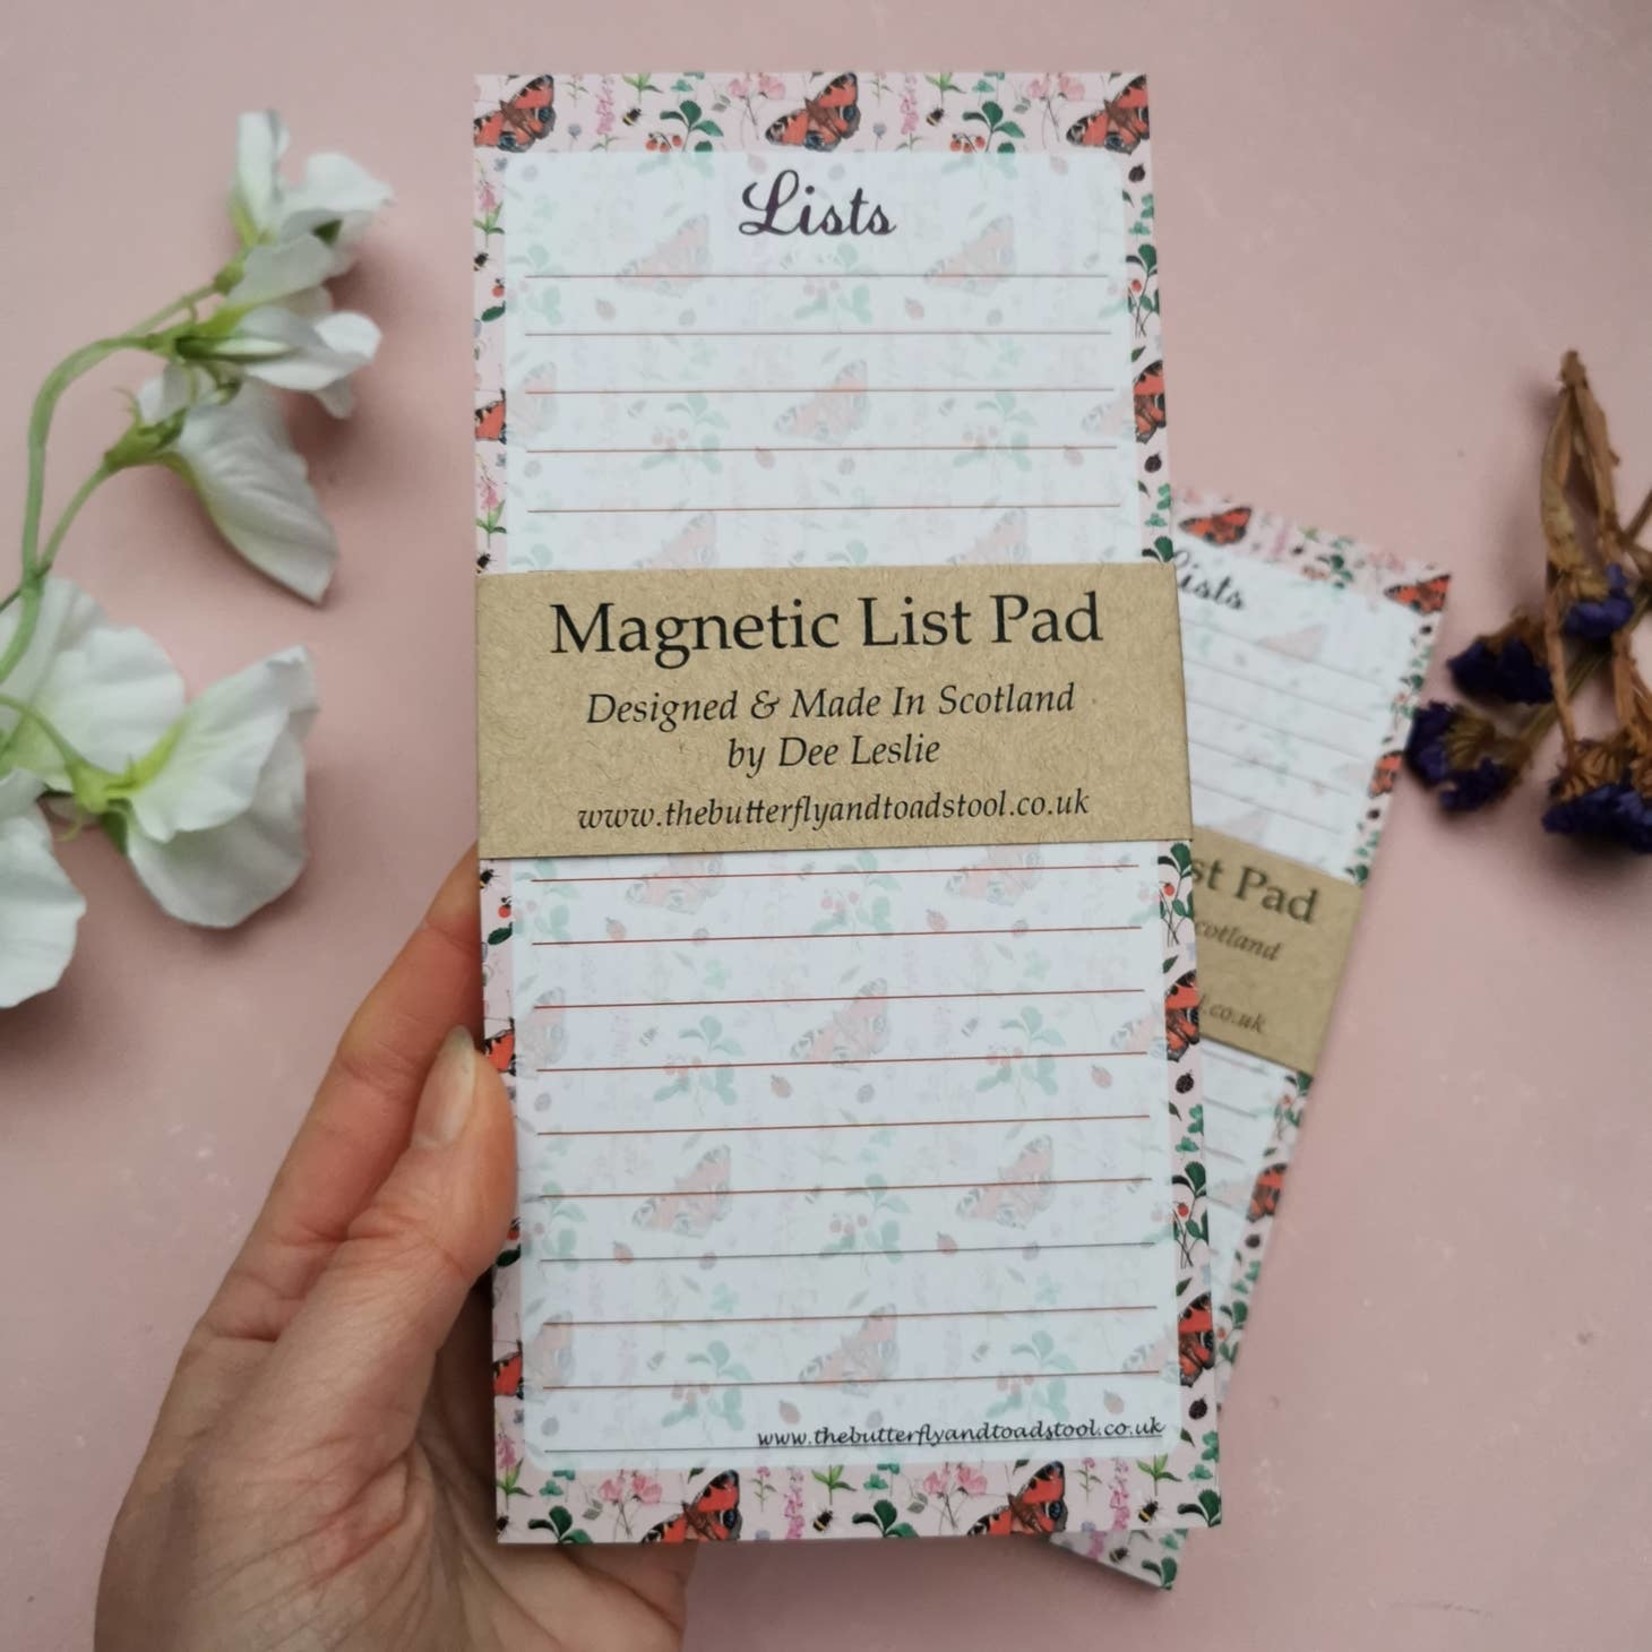 The Butterfly & Toadstool Magnetic List Pads